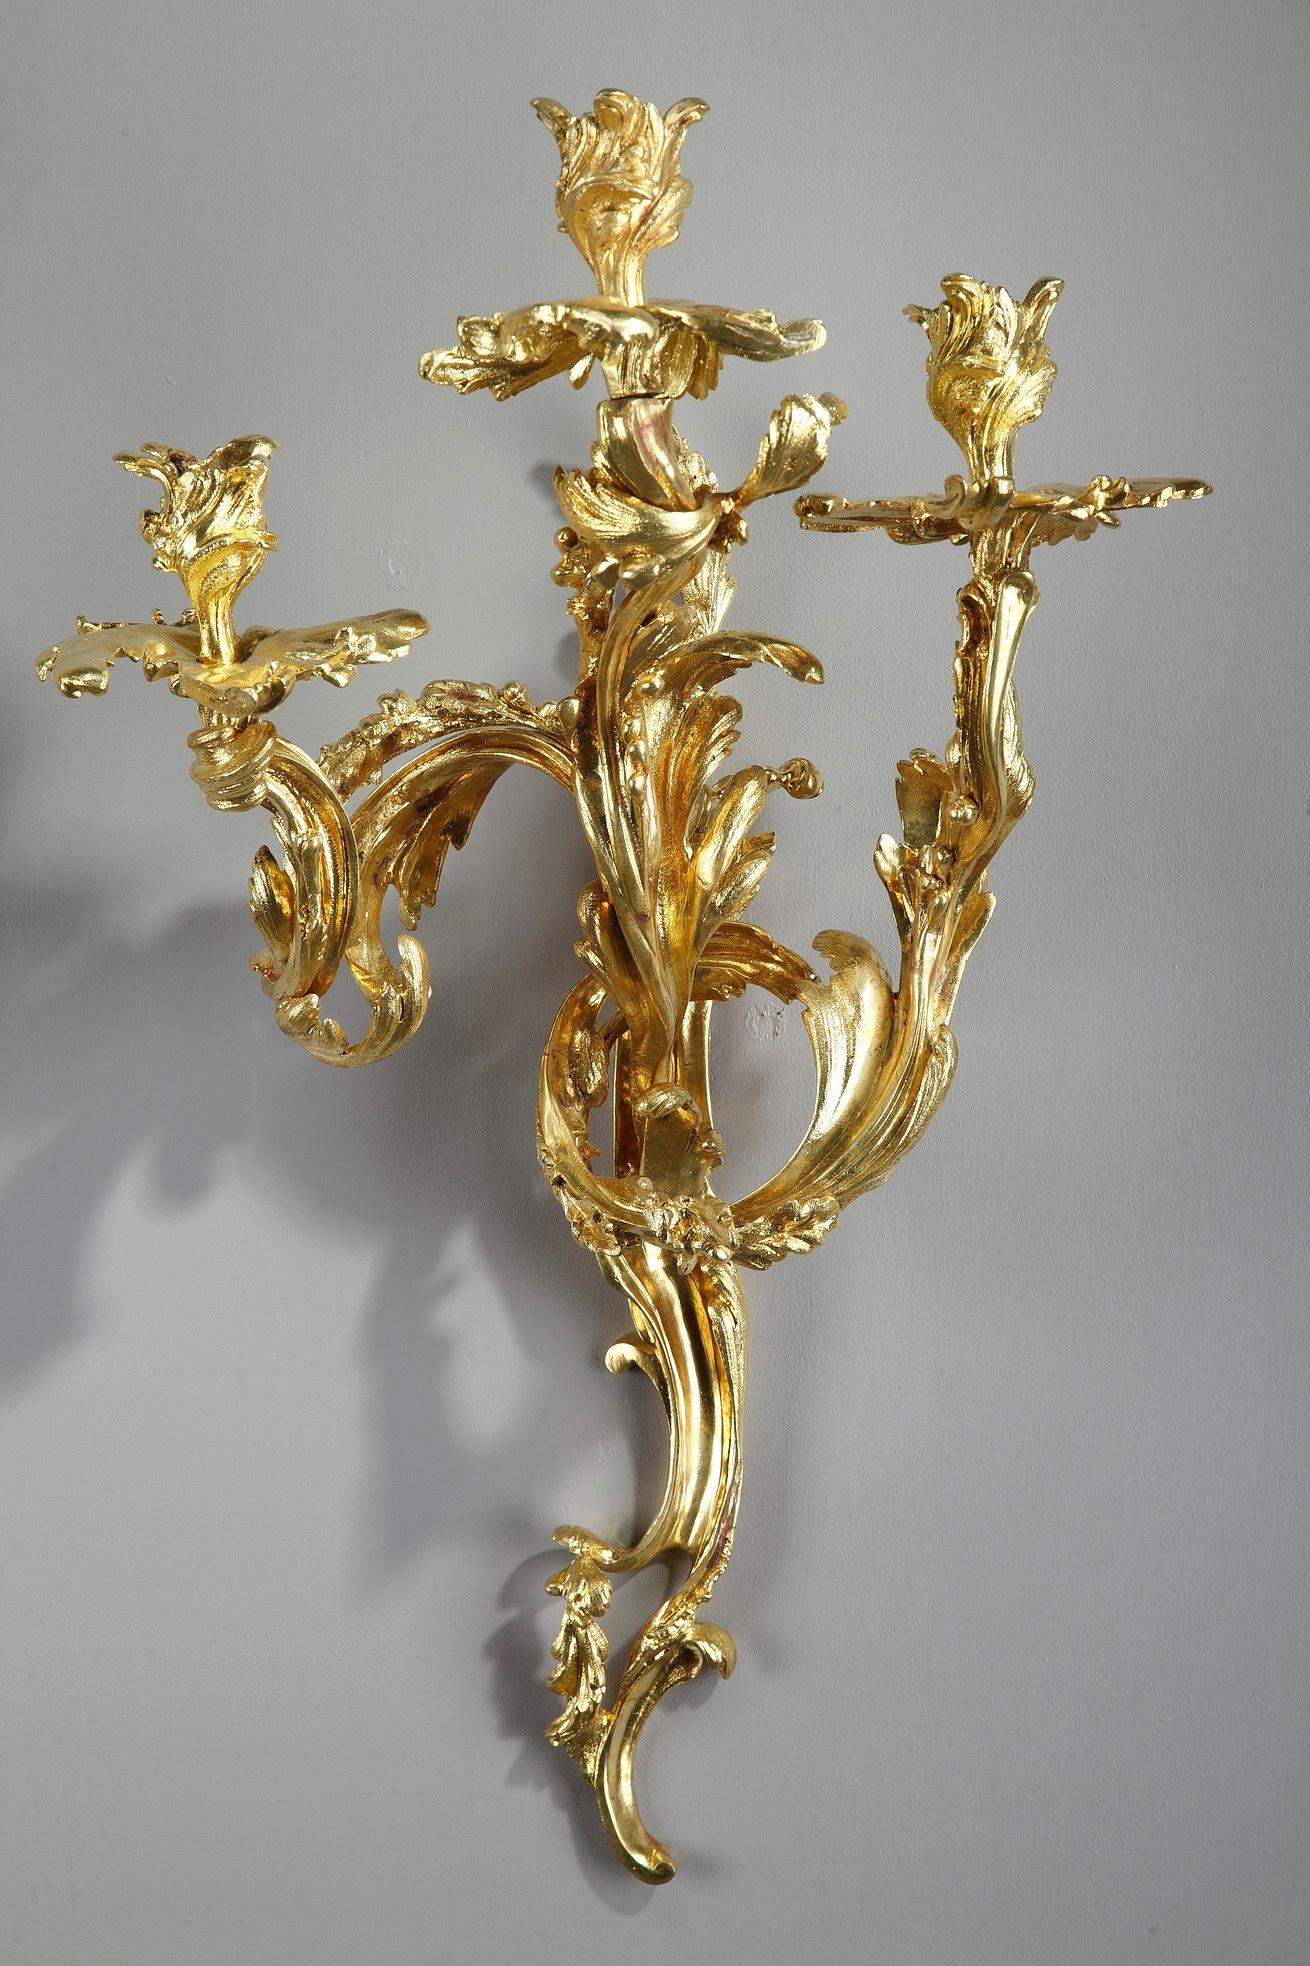 Pair of Napoleon III three-light candle wall sconces crafted in gilt and chiseled bronze. They are richly decorated with flowing and asymmetrical foliage in Louis XV style, largely imitated in the second half of the 19th century.

circa